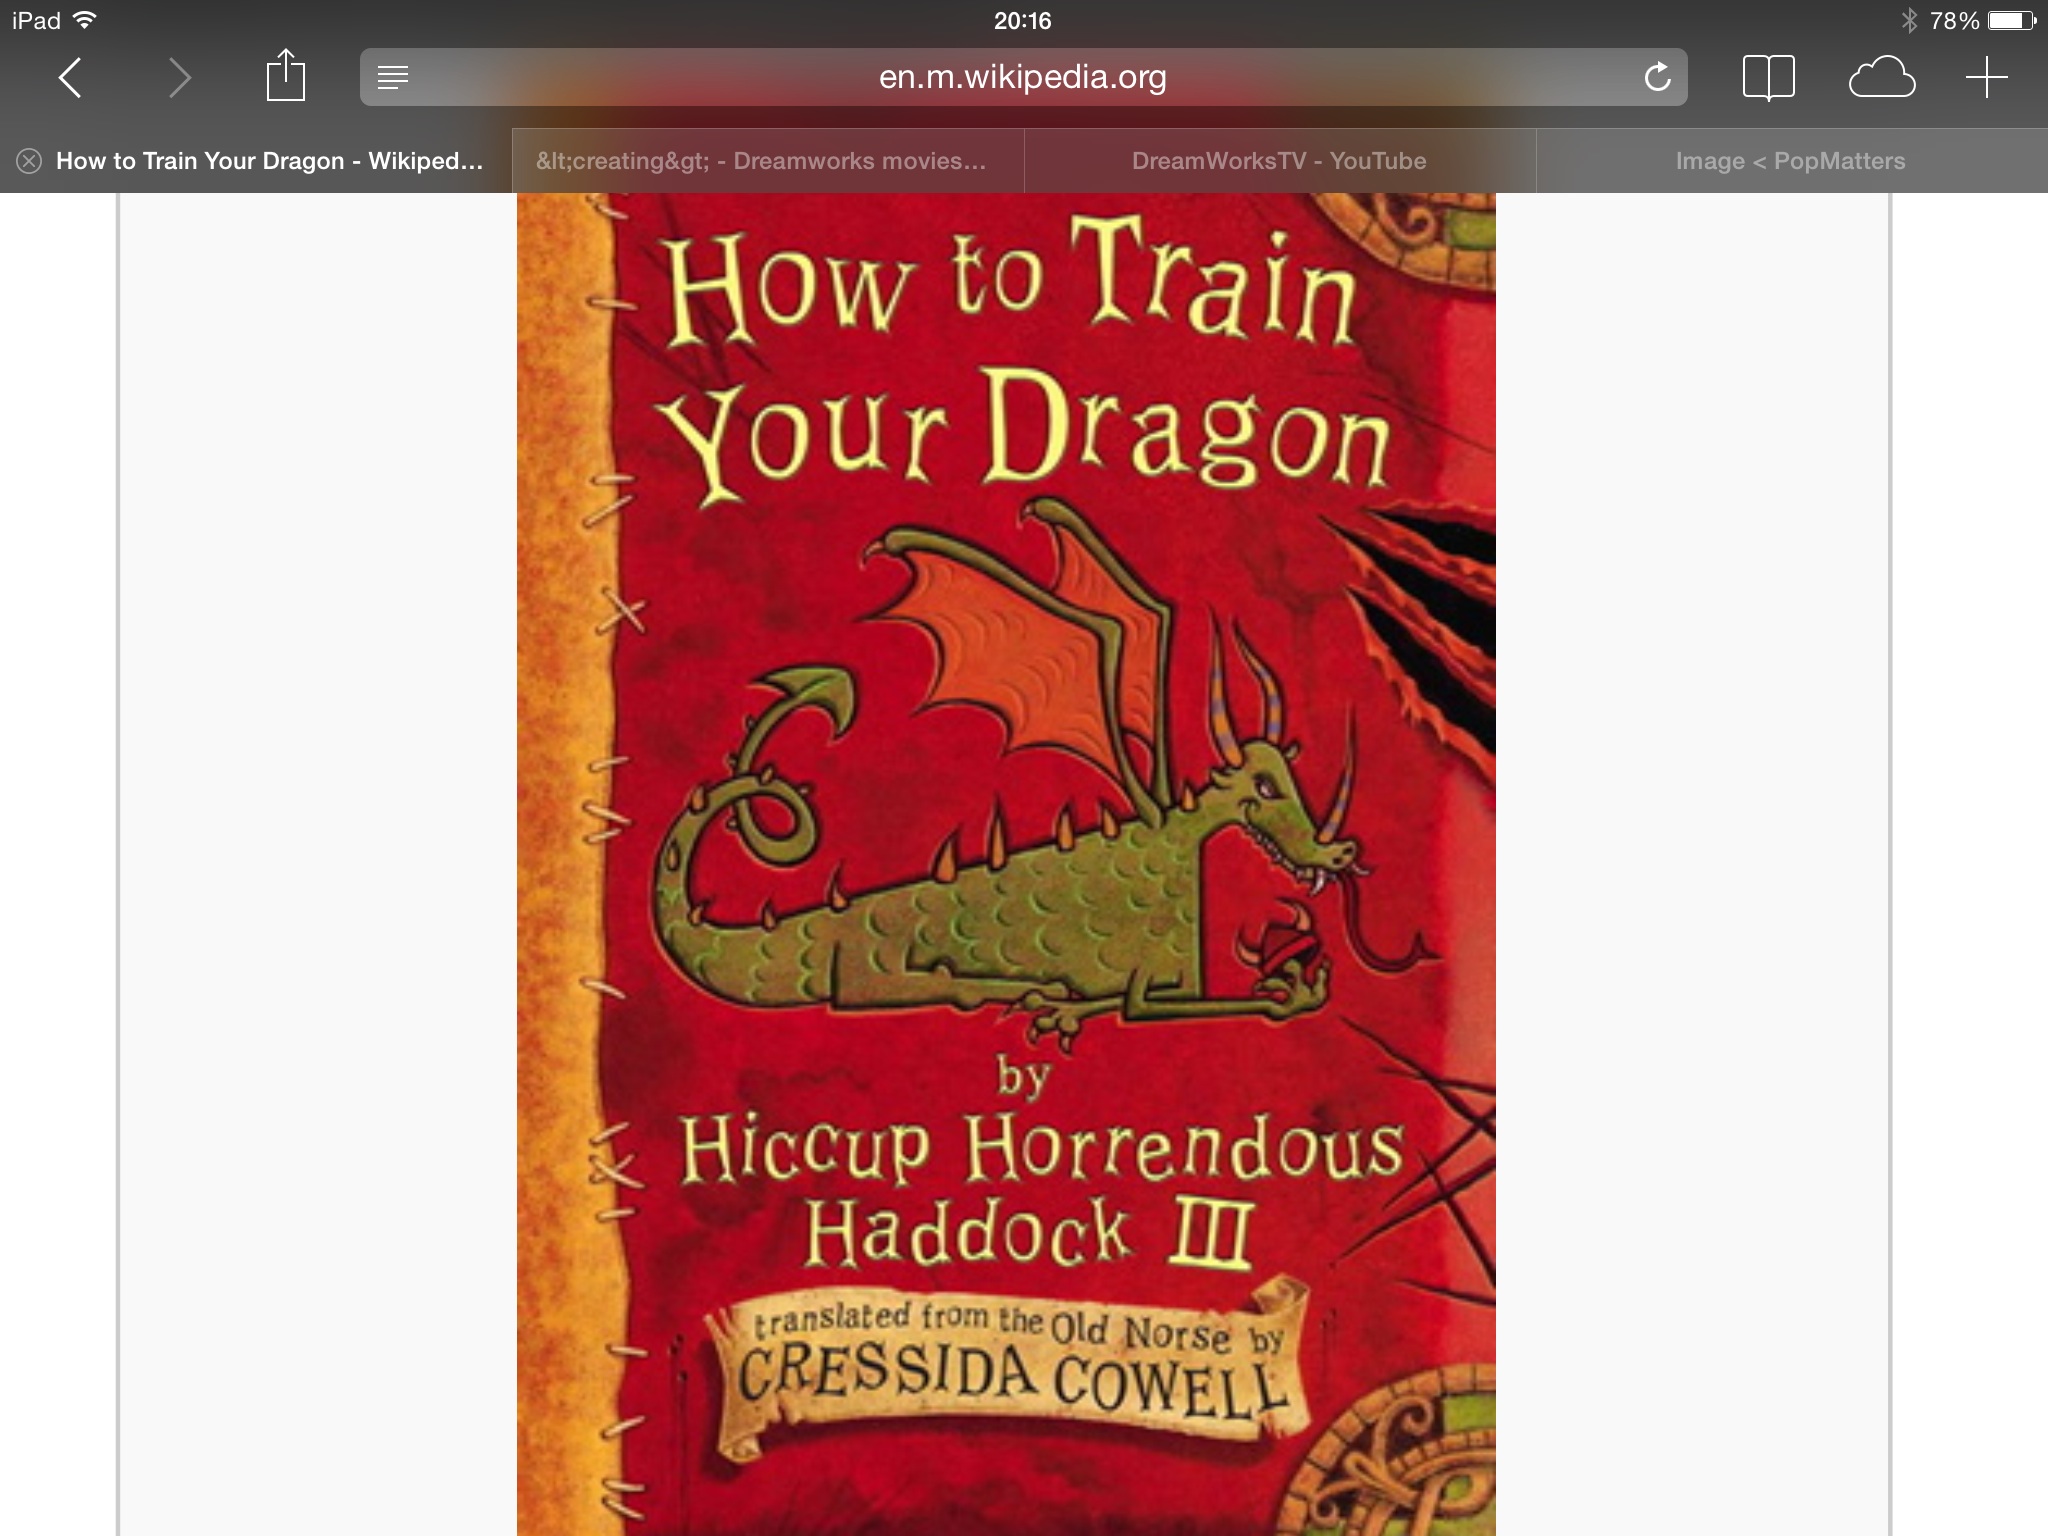 how to train your dragon book